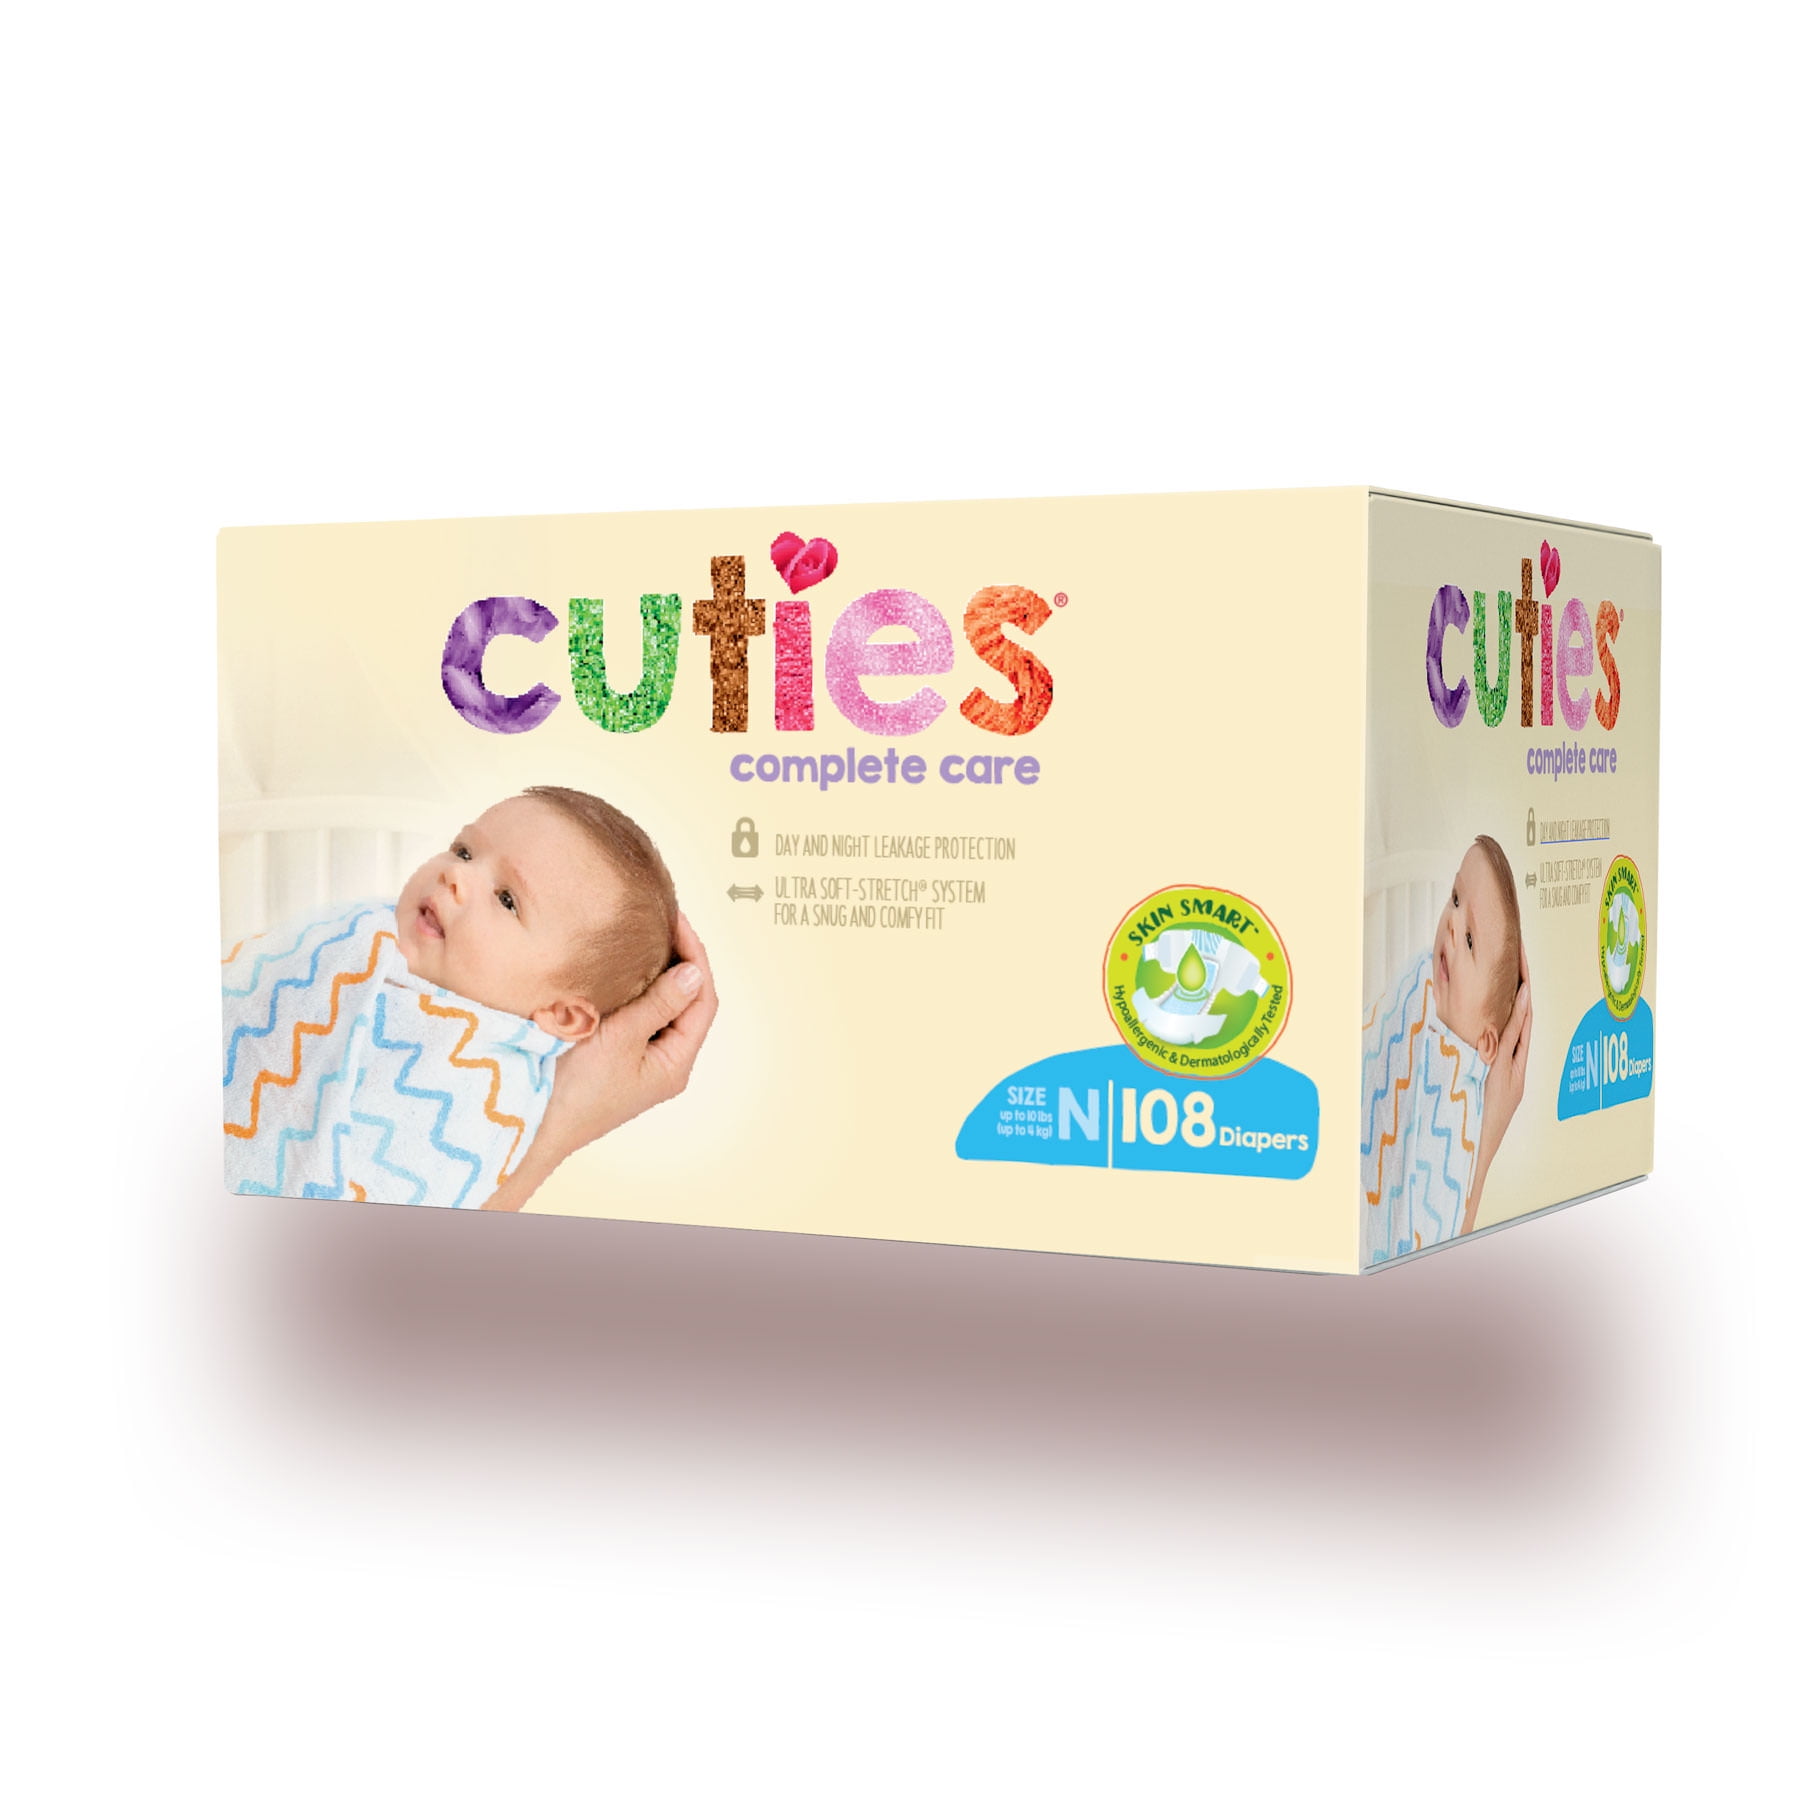 Cuties Diapers Size Chart